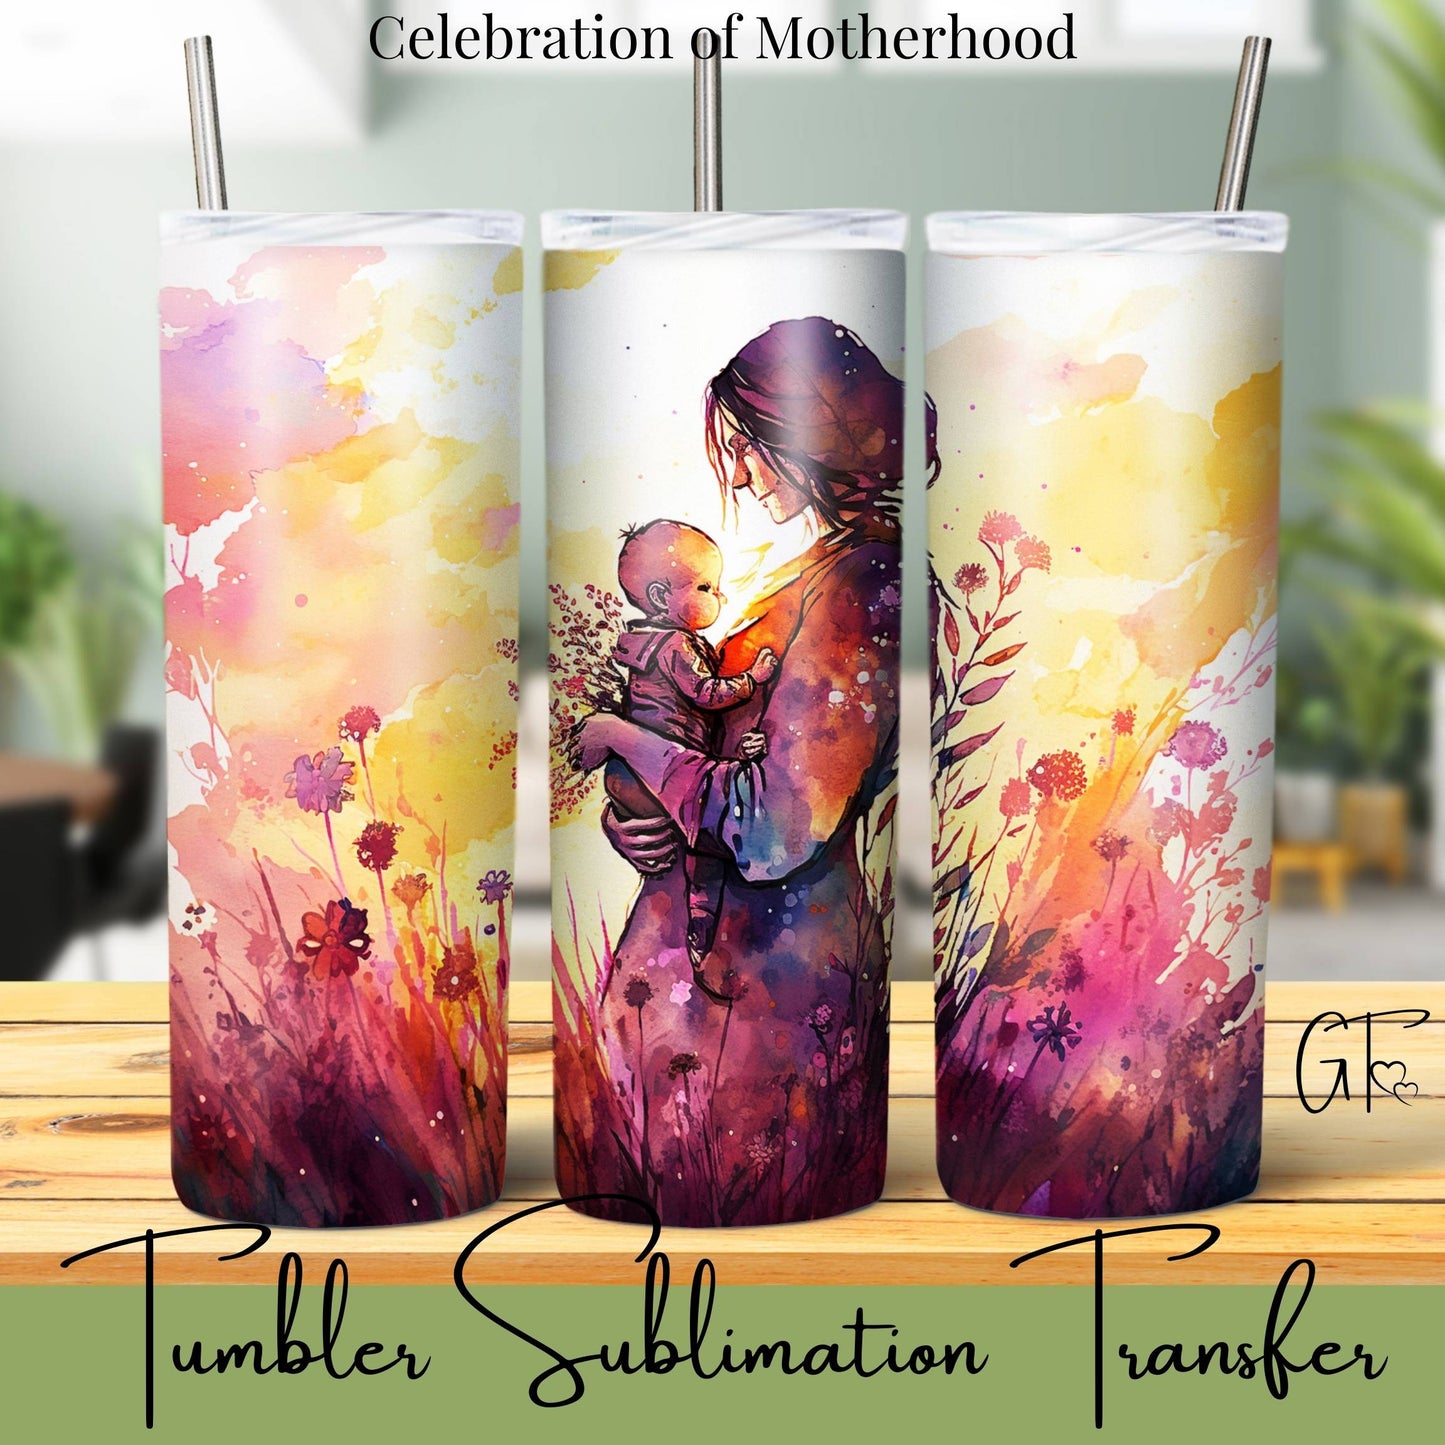 SUB1080 Mothers Silhouette Floral Tumbler Sublimation Transfer